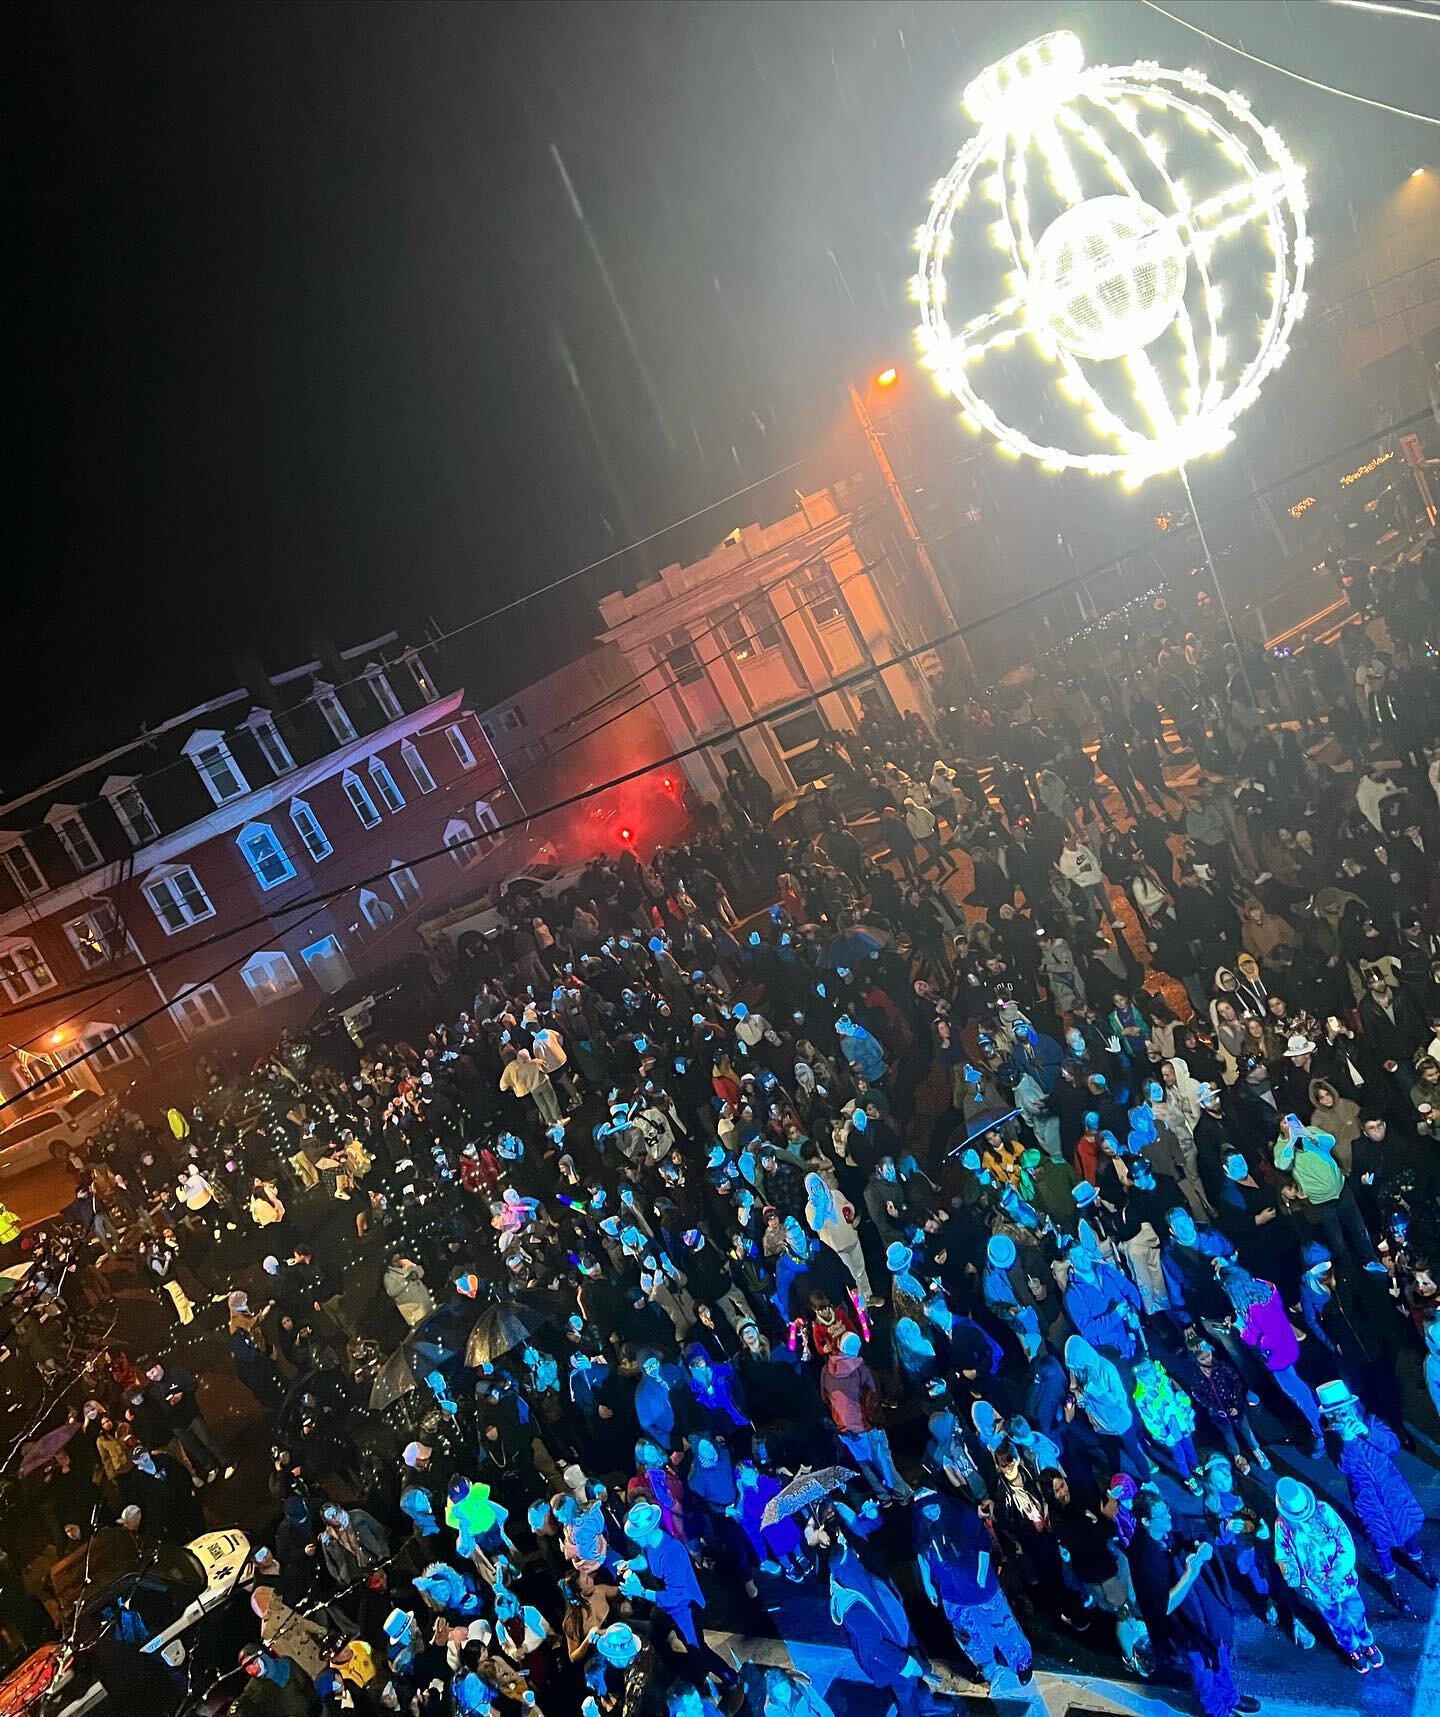 In 2023, Cornwall on Hudson Special Events experienced an incredible year filled with memorable moments and successful initiatives. We kicked off the year in Cornwall style with our 21st annual ball drop in the Village, setting the tone for a year of